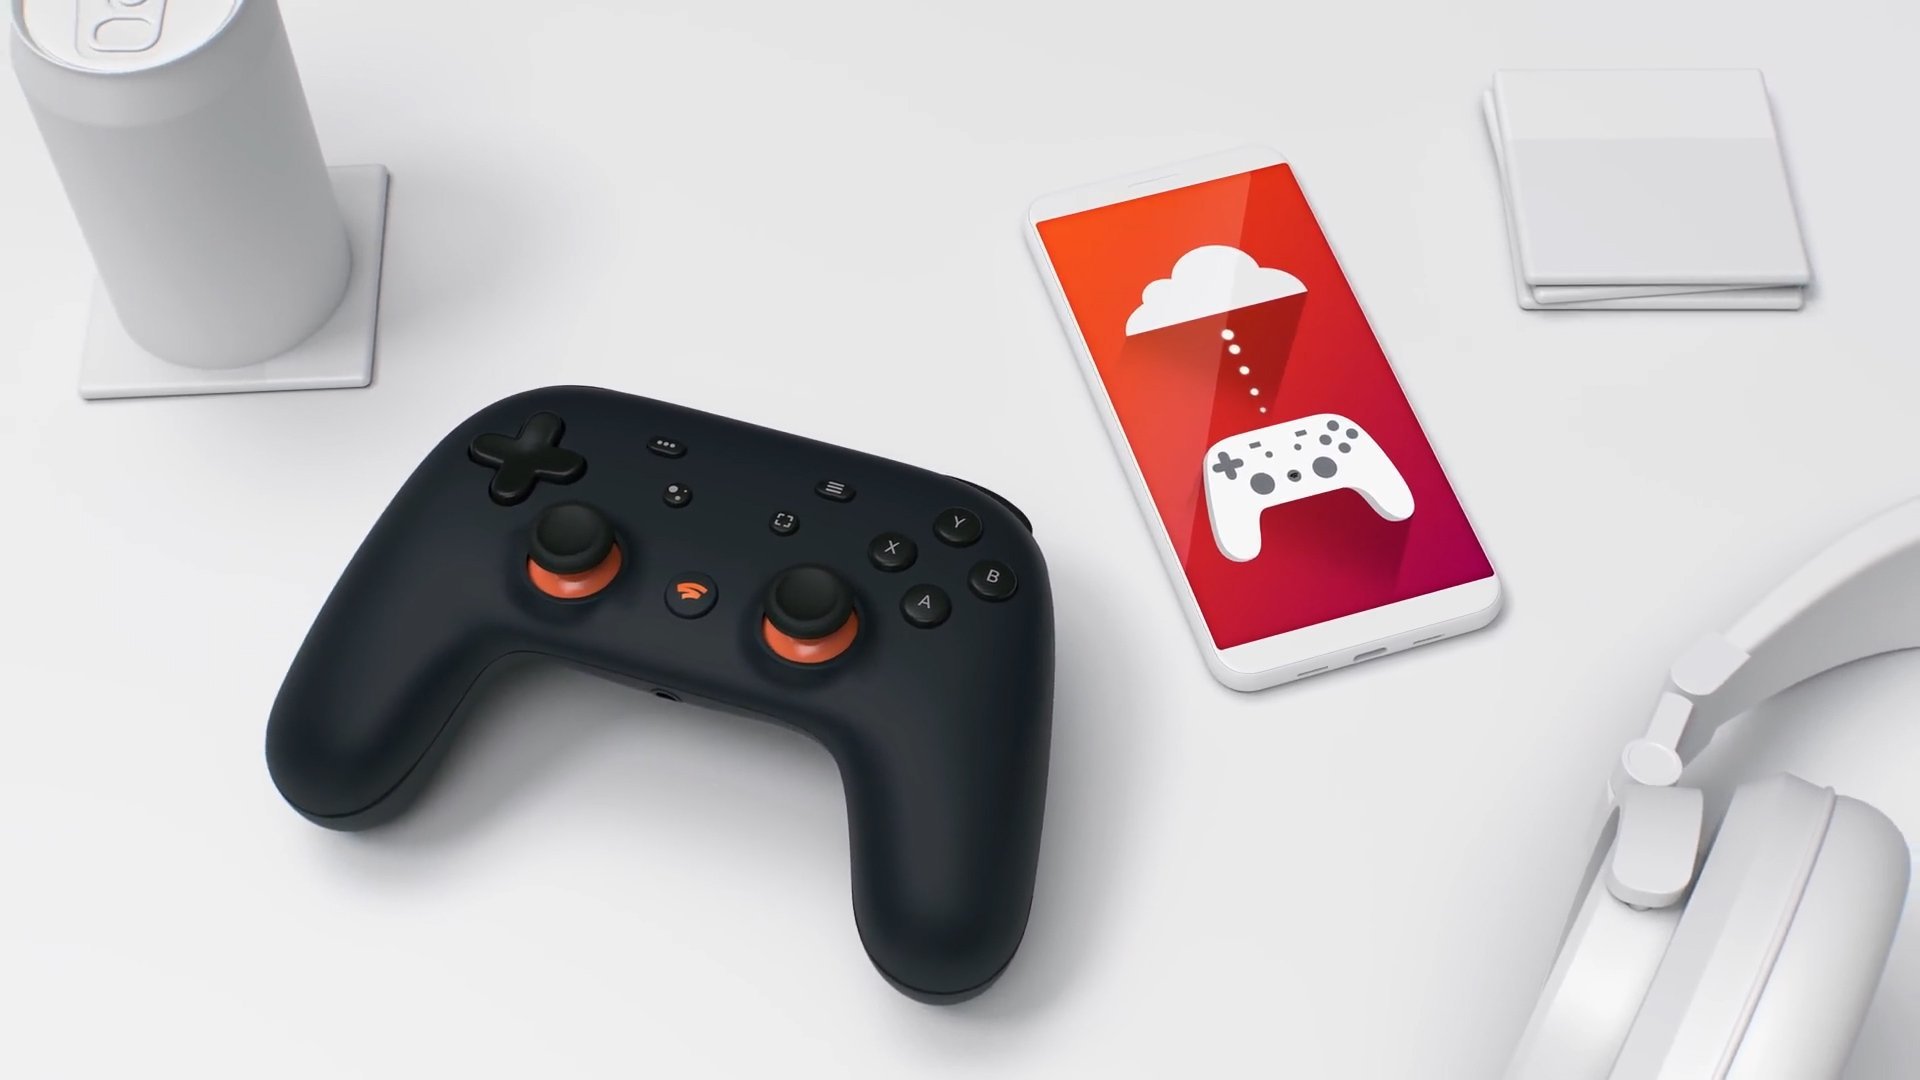 400 Stadia games on the way from 200 developers